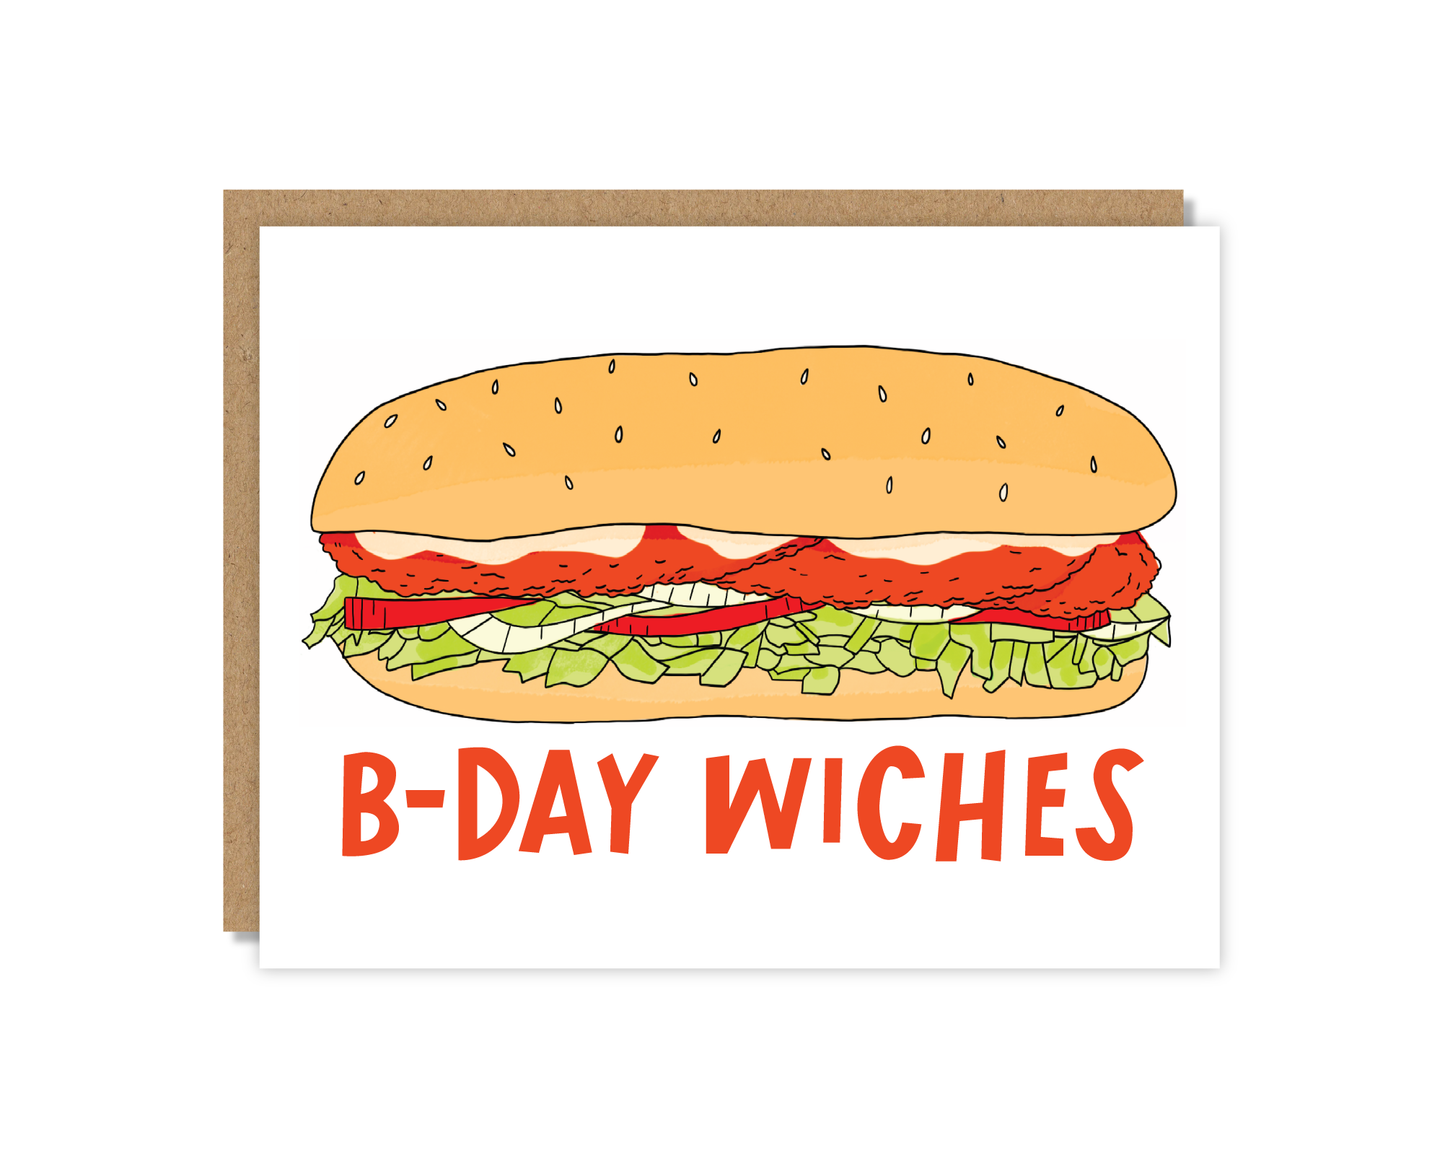 B-Day Wiches